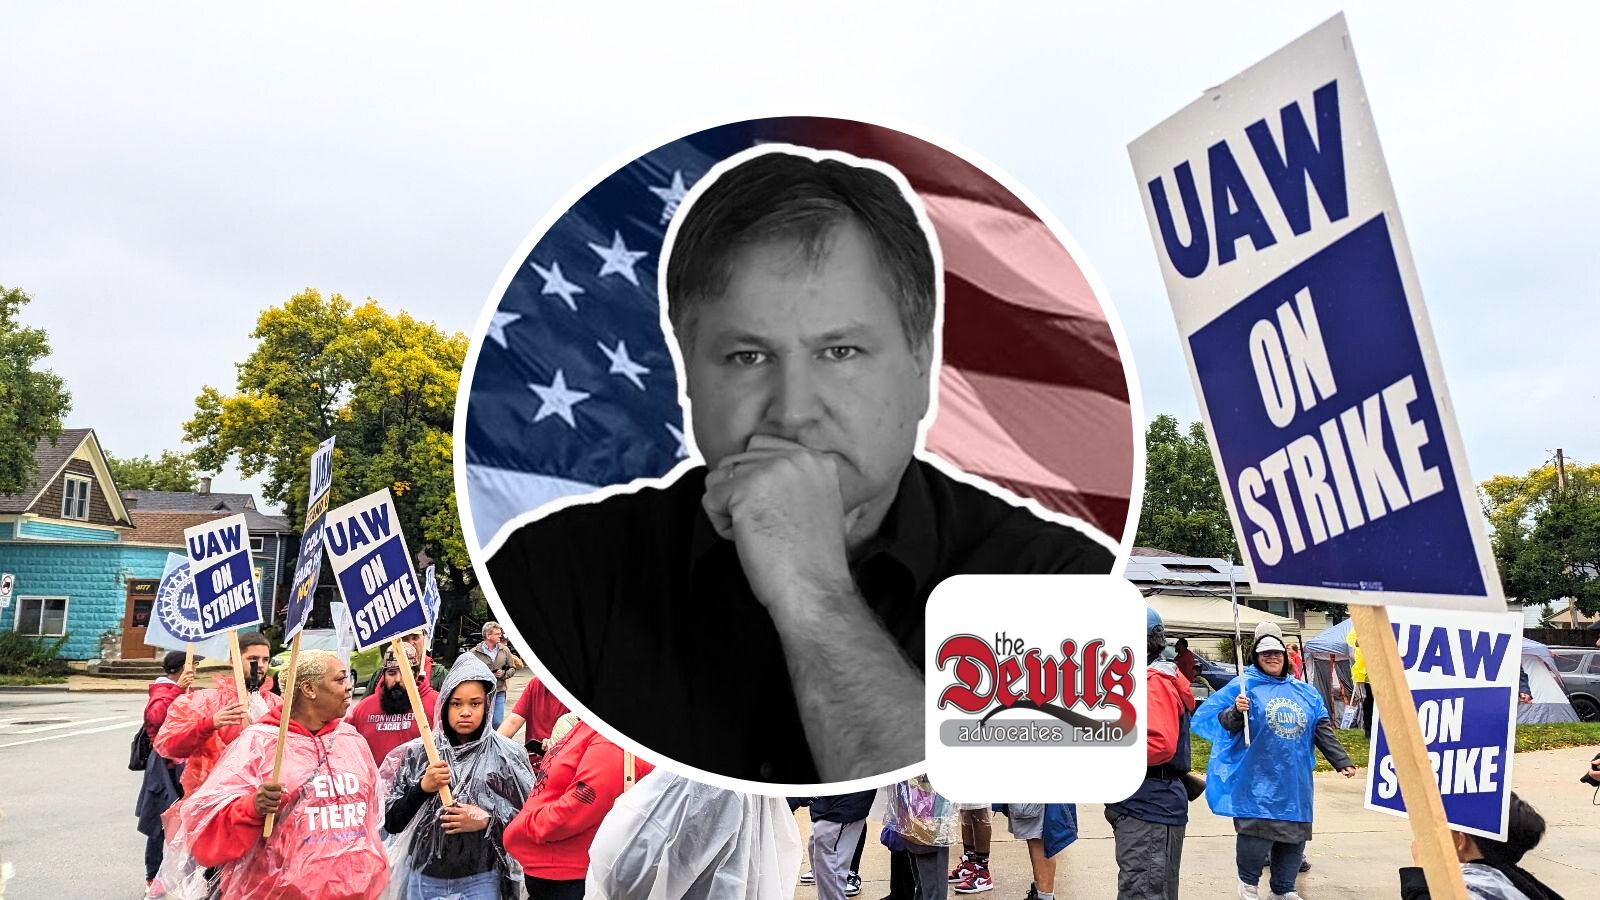 The UAW Strike: The Future of Wisconsin Labor